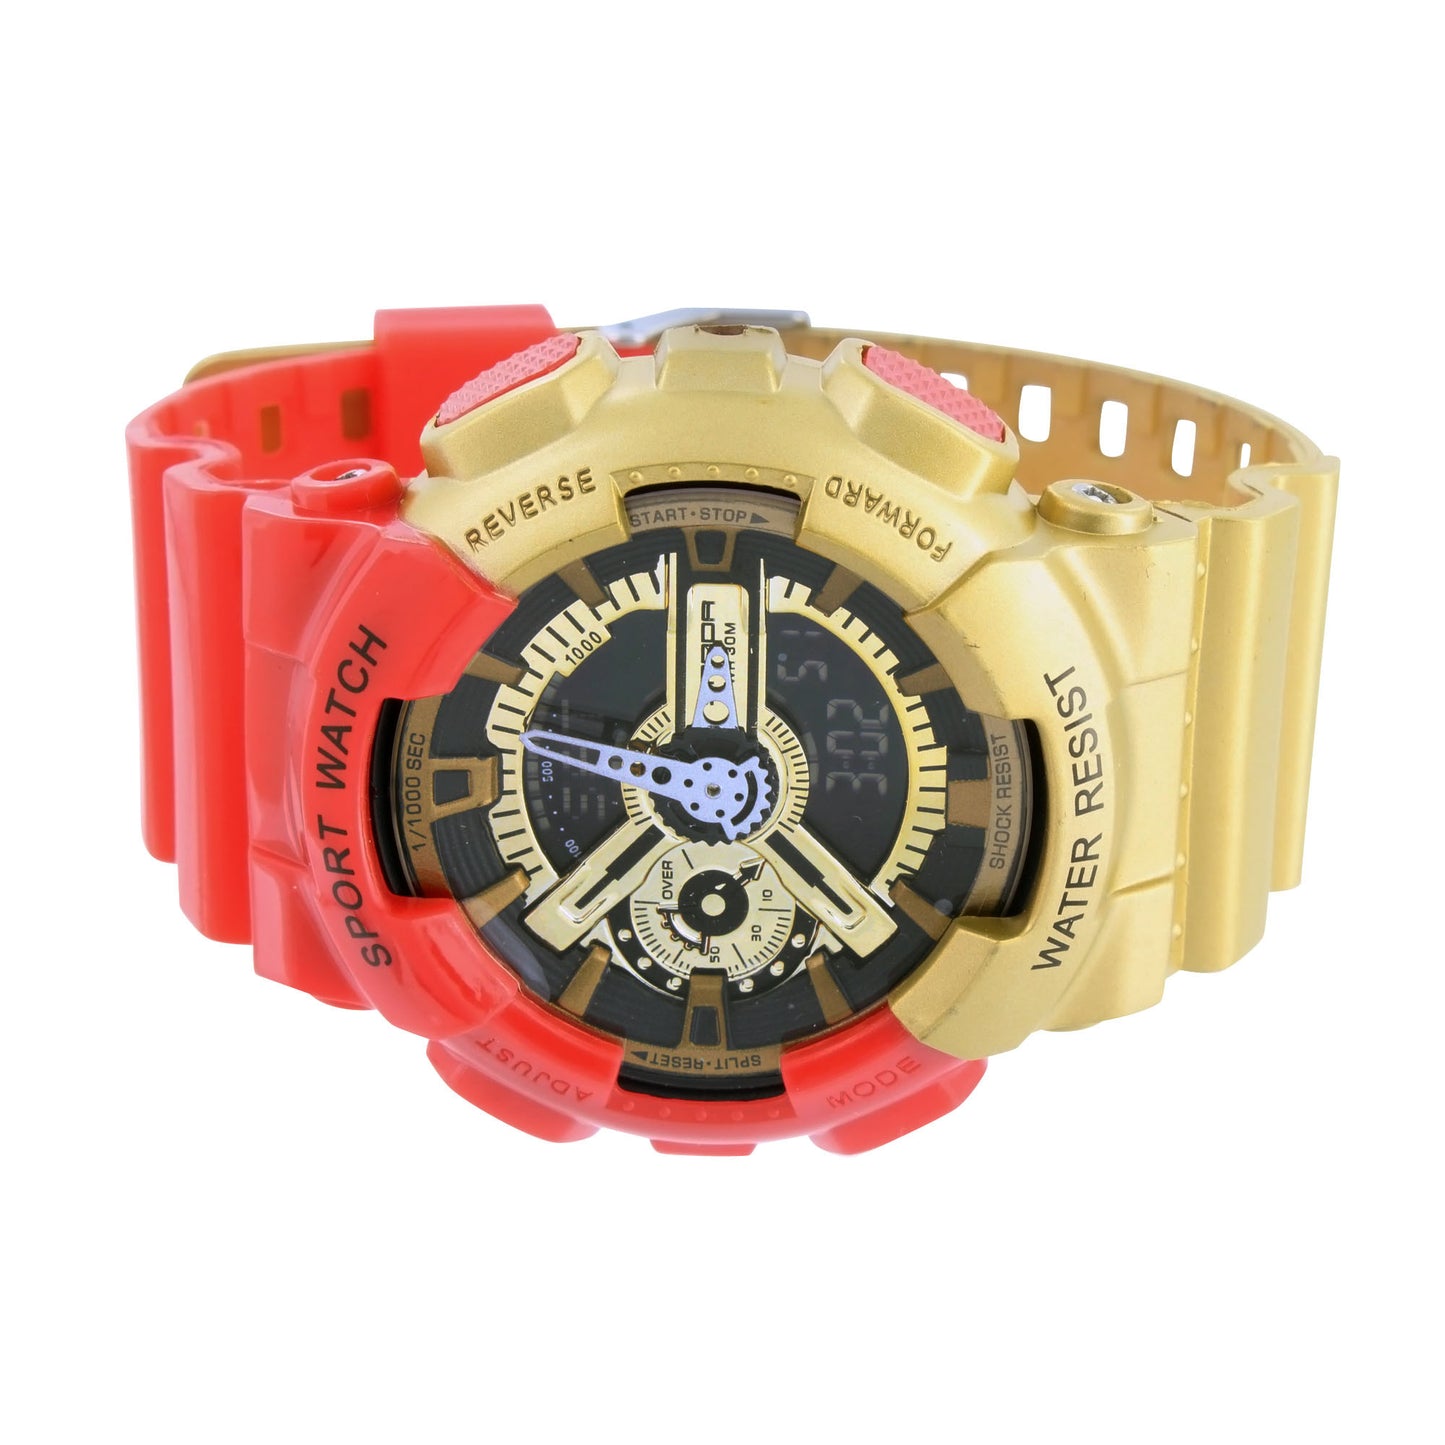 Digital Analog Watches Iron Man Red/Gold Classic Series